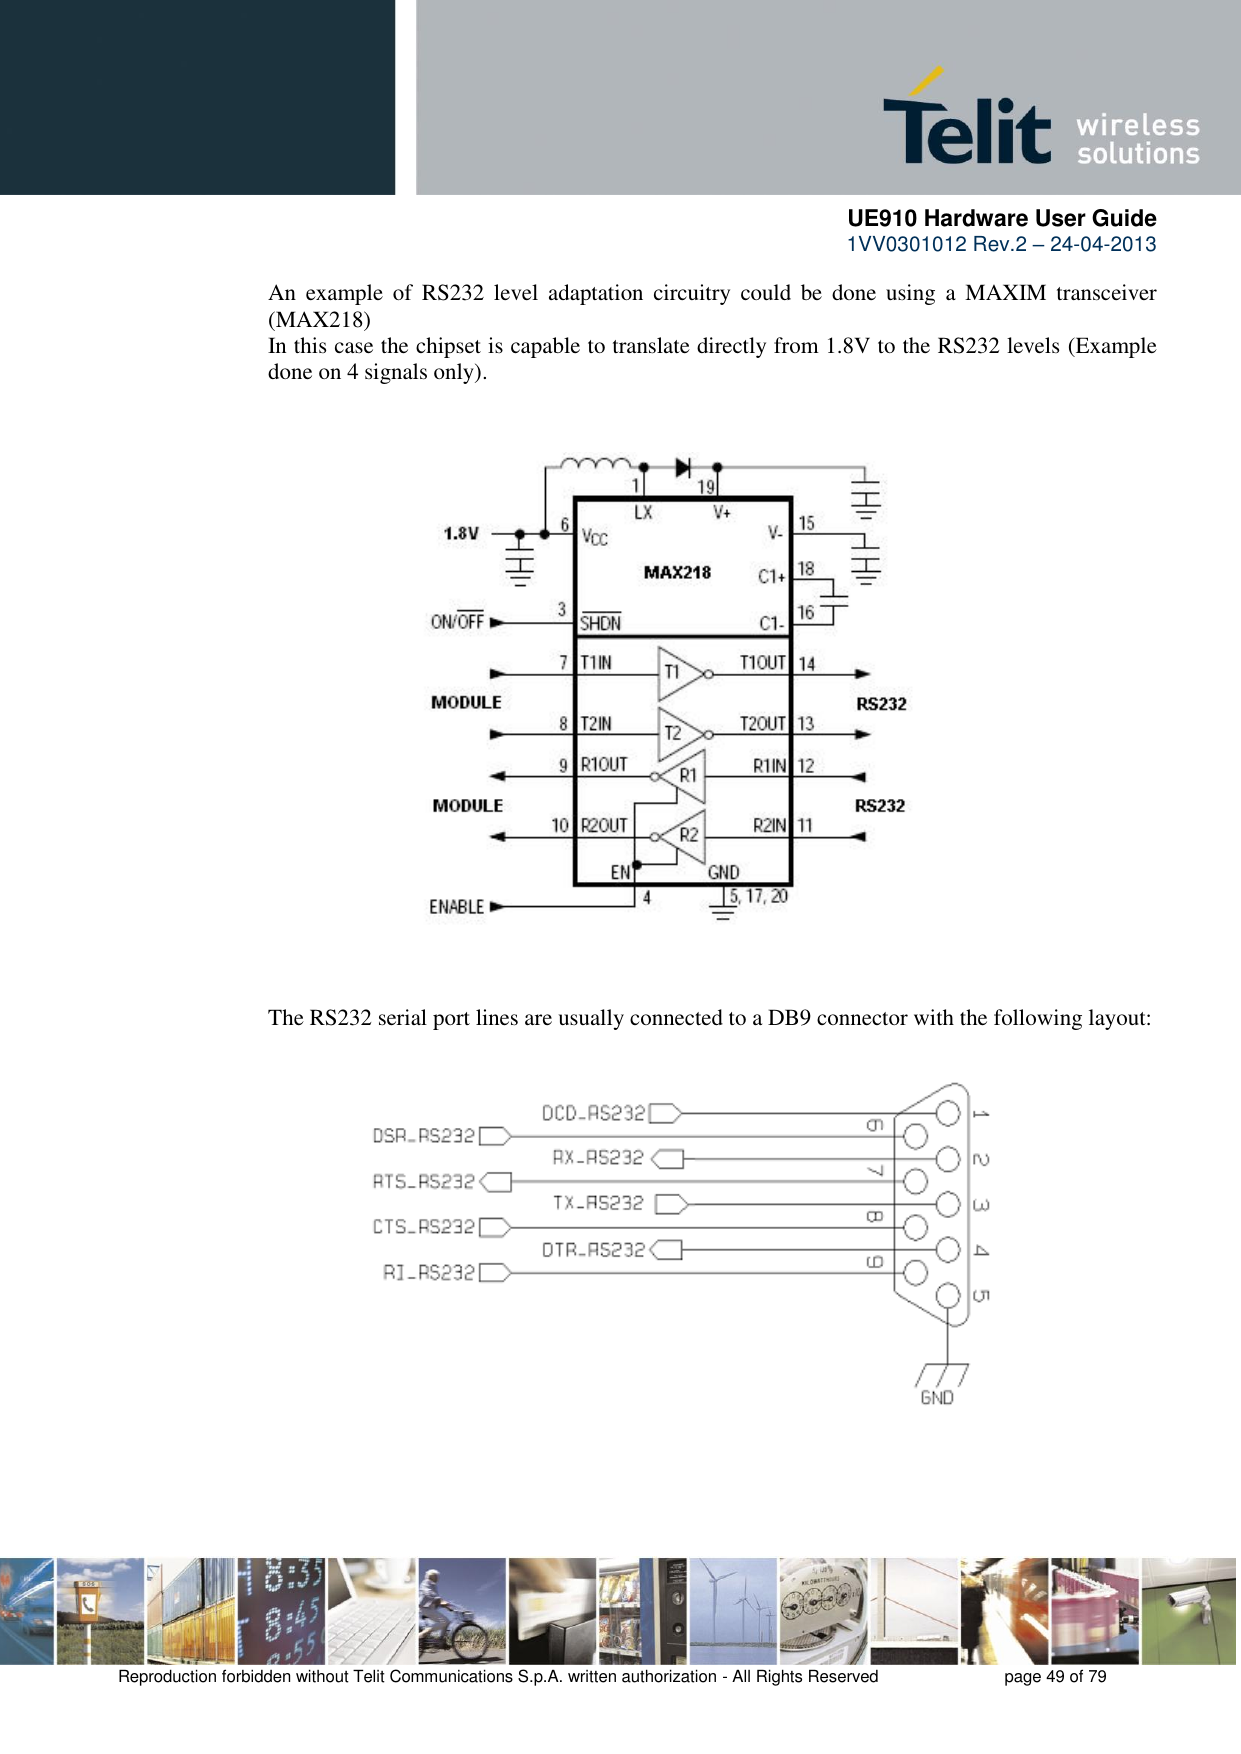      UE910 Hardware User Guide  1VV0301012 Rev.2 – 24-04-2013    Reproduction forbidden without Telit Communications S.p.A. written authorization - All Rights Reserved    page 49 of 79  An  example  of  RS232  level adaptation  circuitry  could  be  done  using  a  MAXIM  transceiver (MAX218)  In this case the chipset is capable to translate directly from 1.8V to the RS232 levels (Example done on 4 signals only). The RS232 serial port lines are usually connected to a DB9 connector with the following layout: 